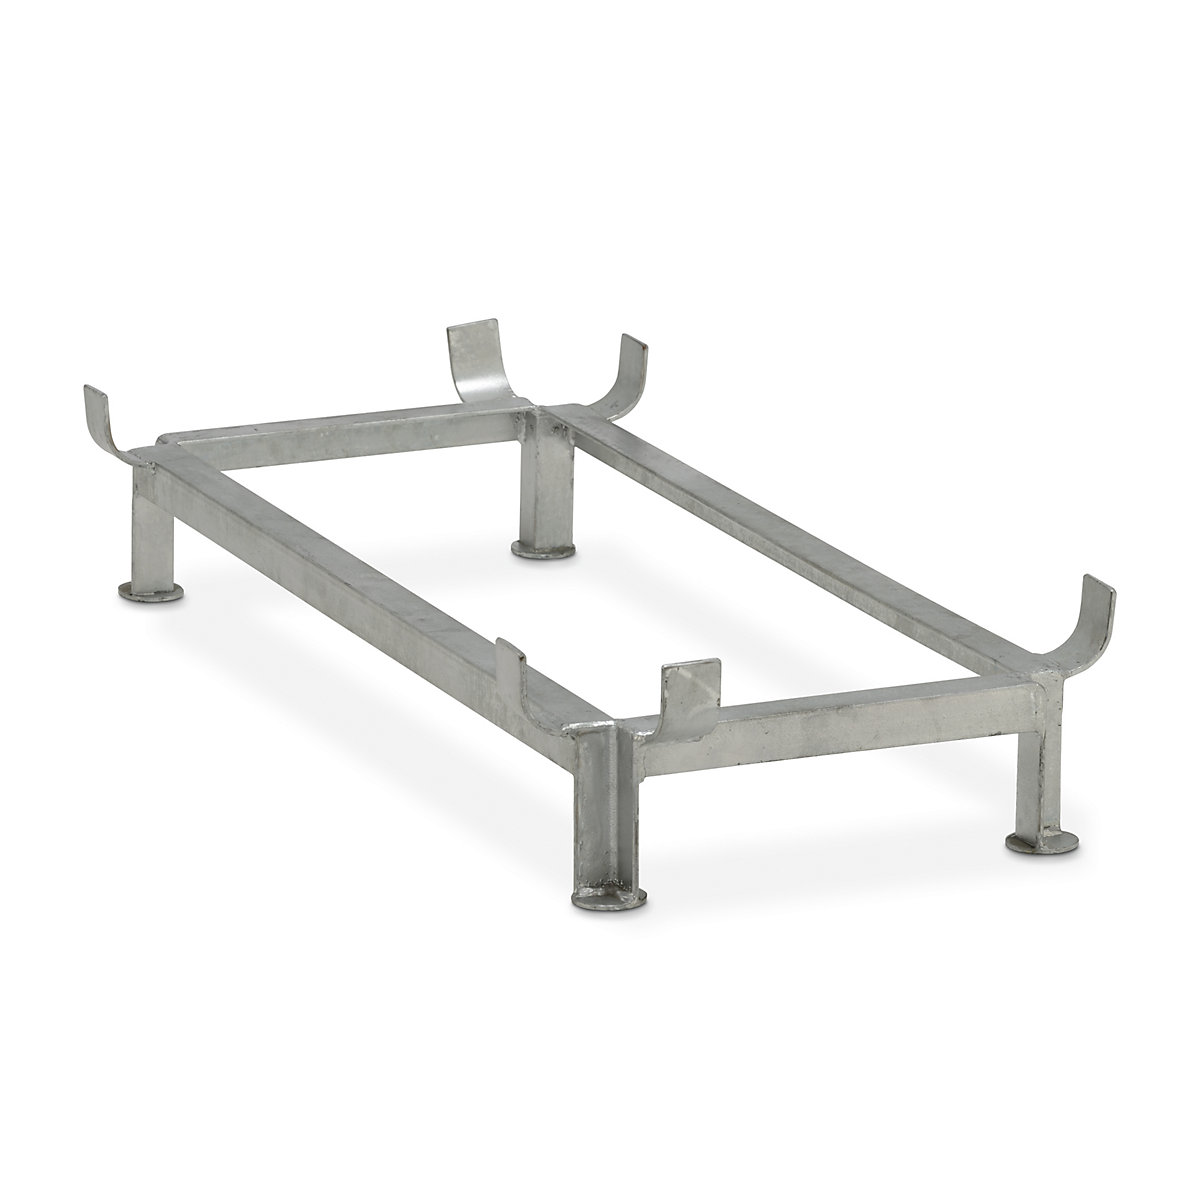 Steel base frame – CEMO, zinc plated, for LxW 1218 x 620 mm, capacity 200 litres